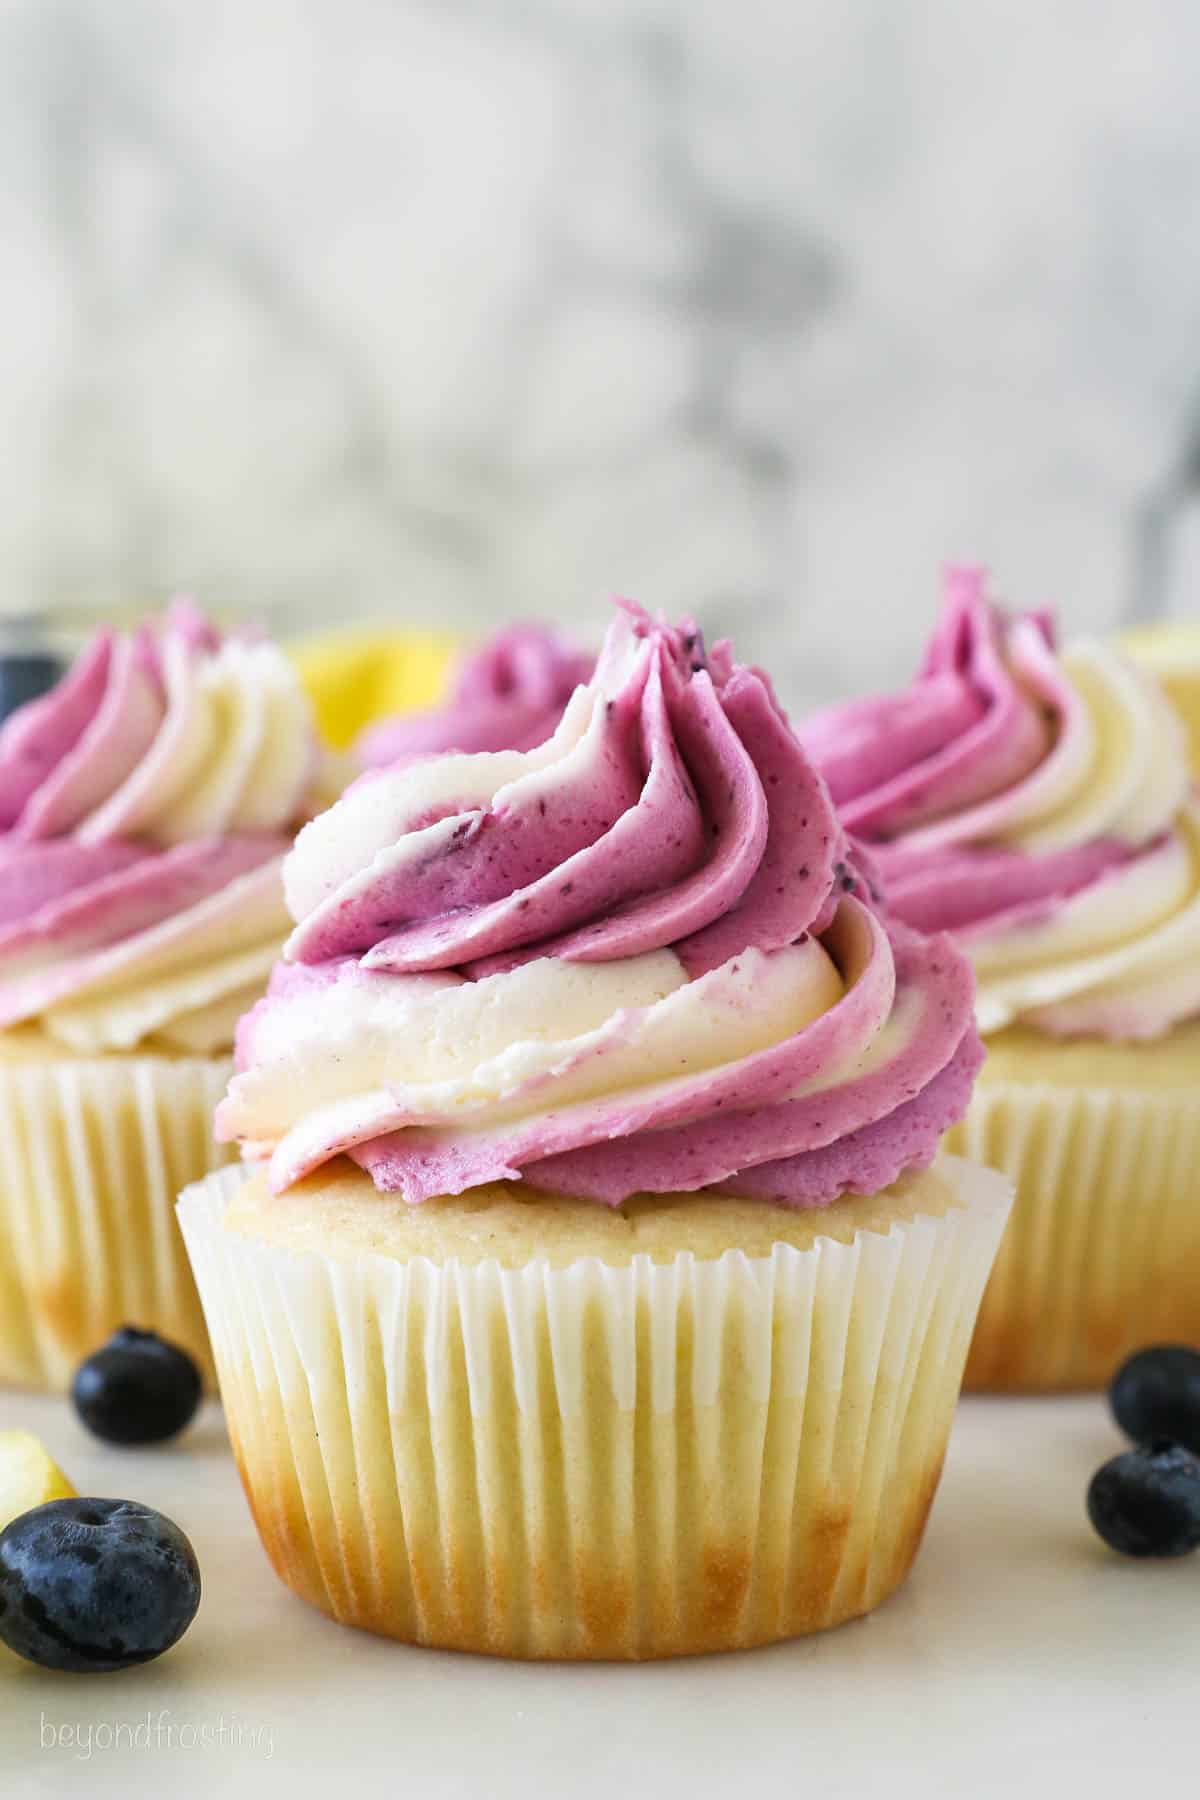 A close up of Lemon Blueberry Cupcakes with a swirled vanilla and blueberry buttercream